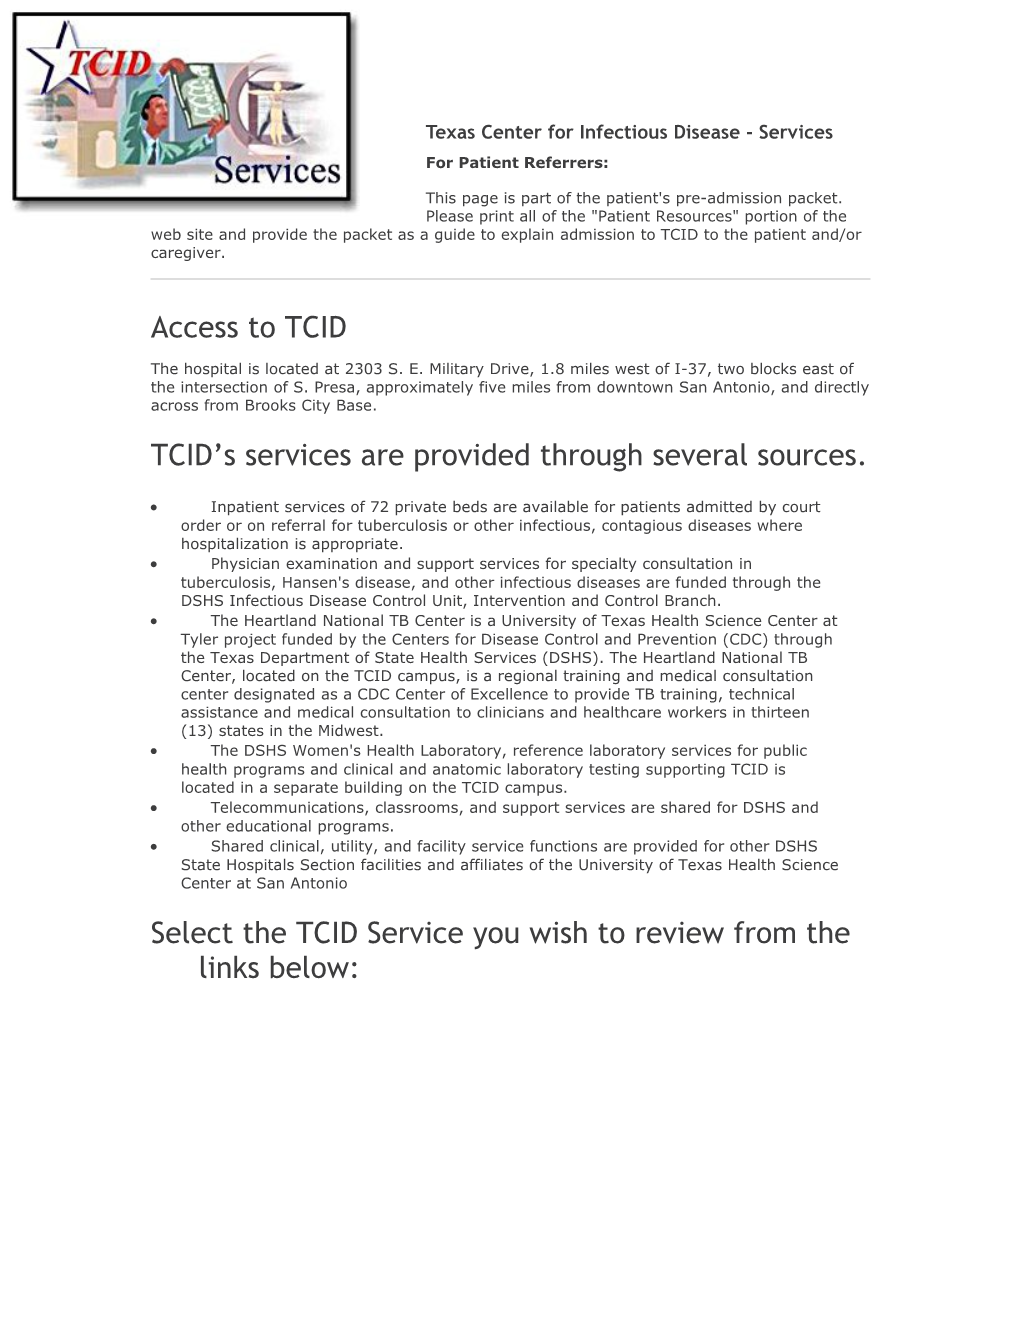 About TCID-Services Revised 0312 FINAL